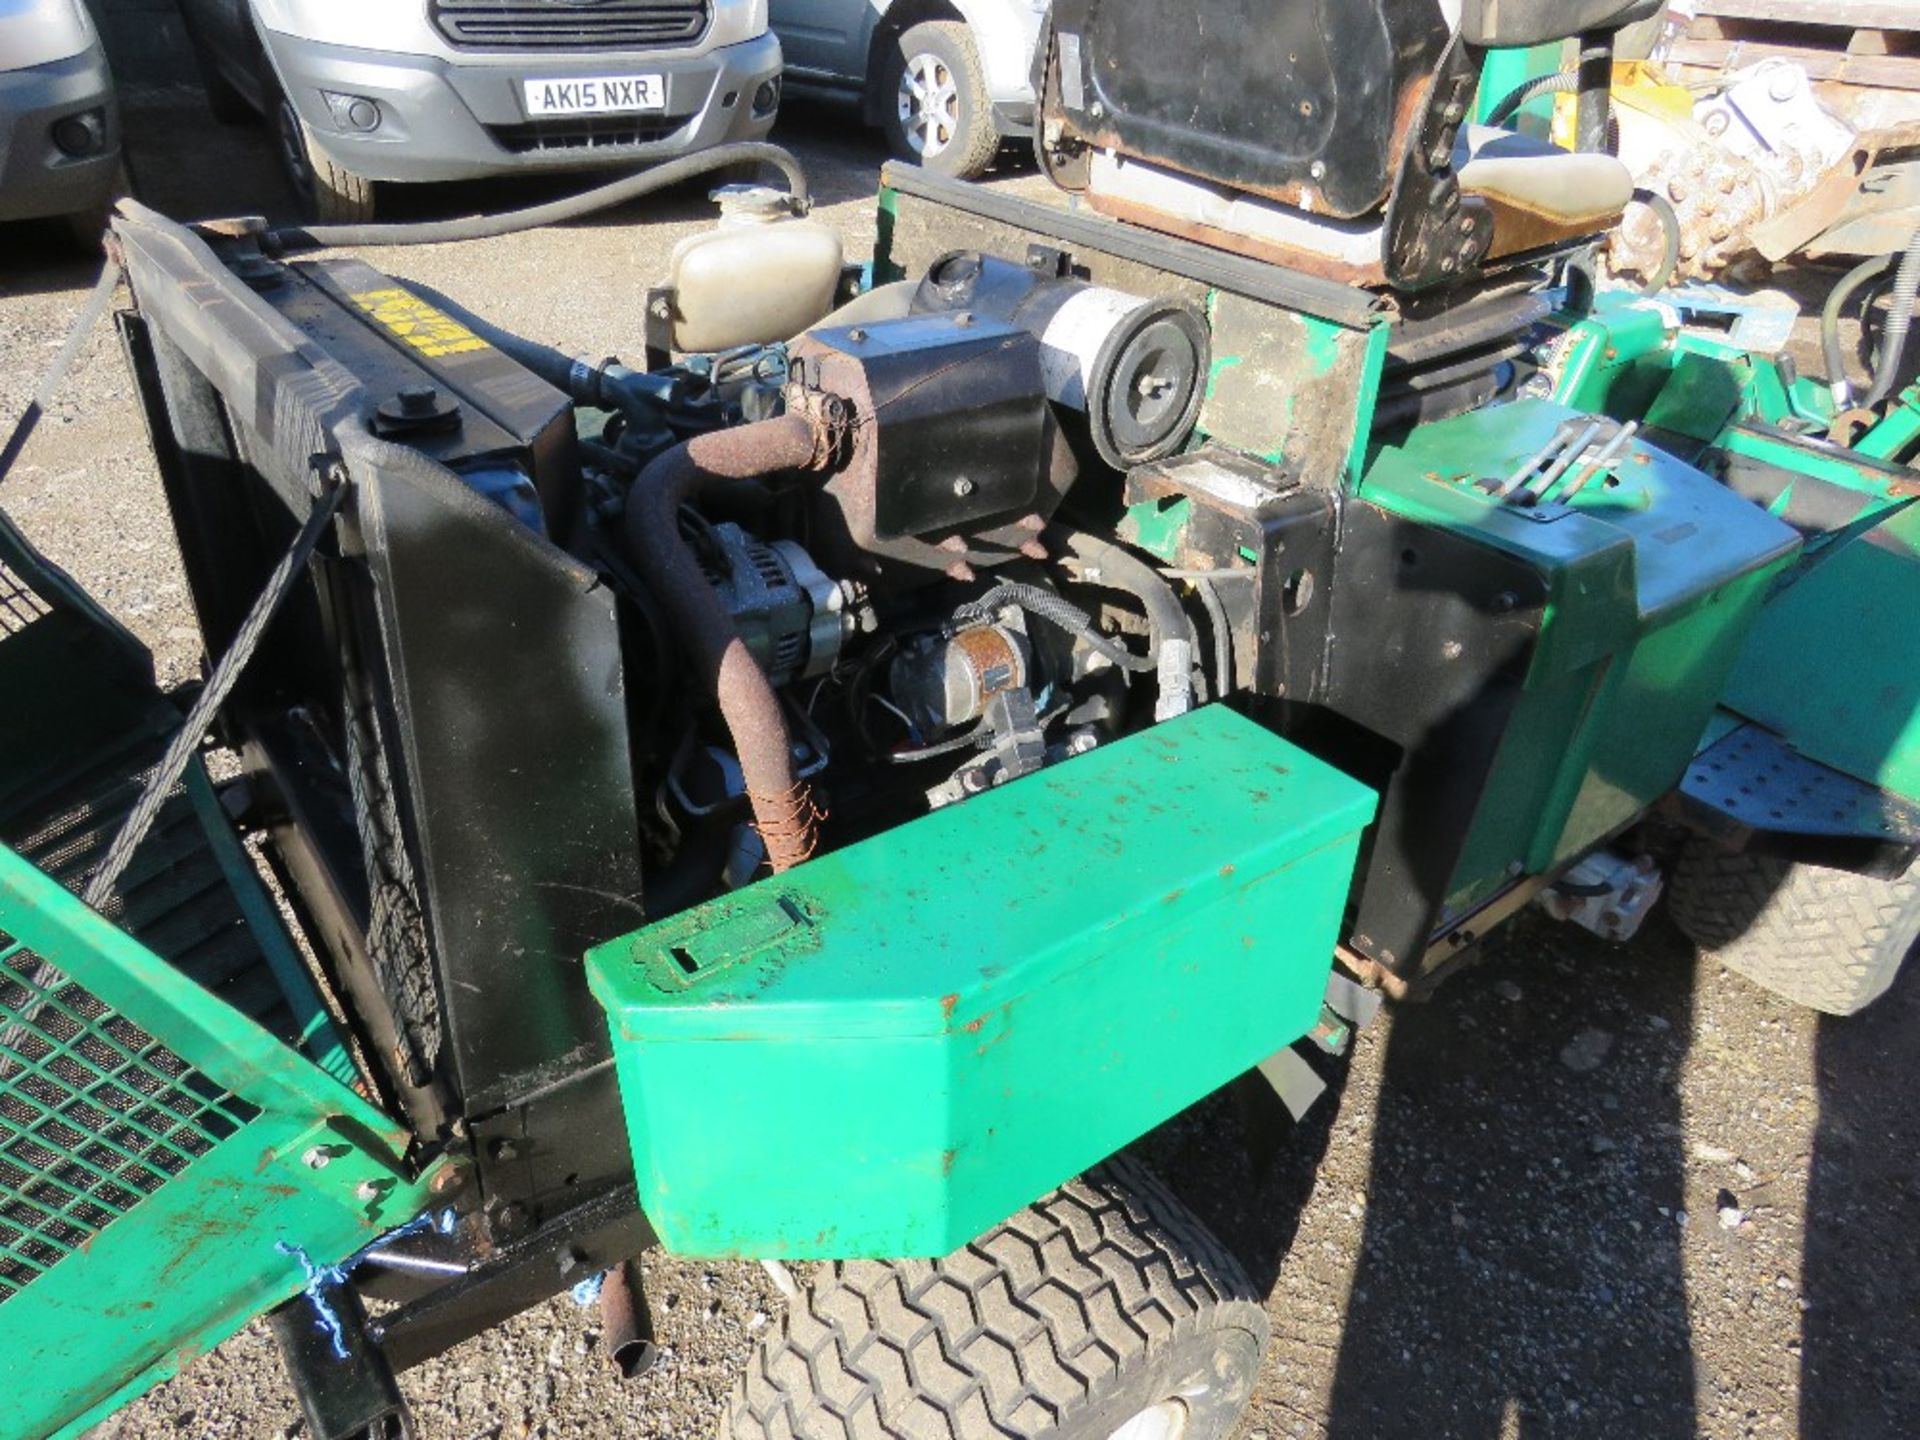 RANSOMES 213 RIDE ON TRIPLE MOWER WITH KUBOTA ENGINE. WHEN TESTED WAS SEEN RO RUN , DRIVE AND CYLIND - Image 7 of 7